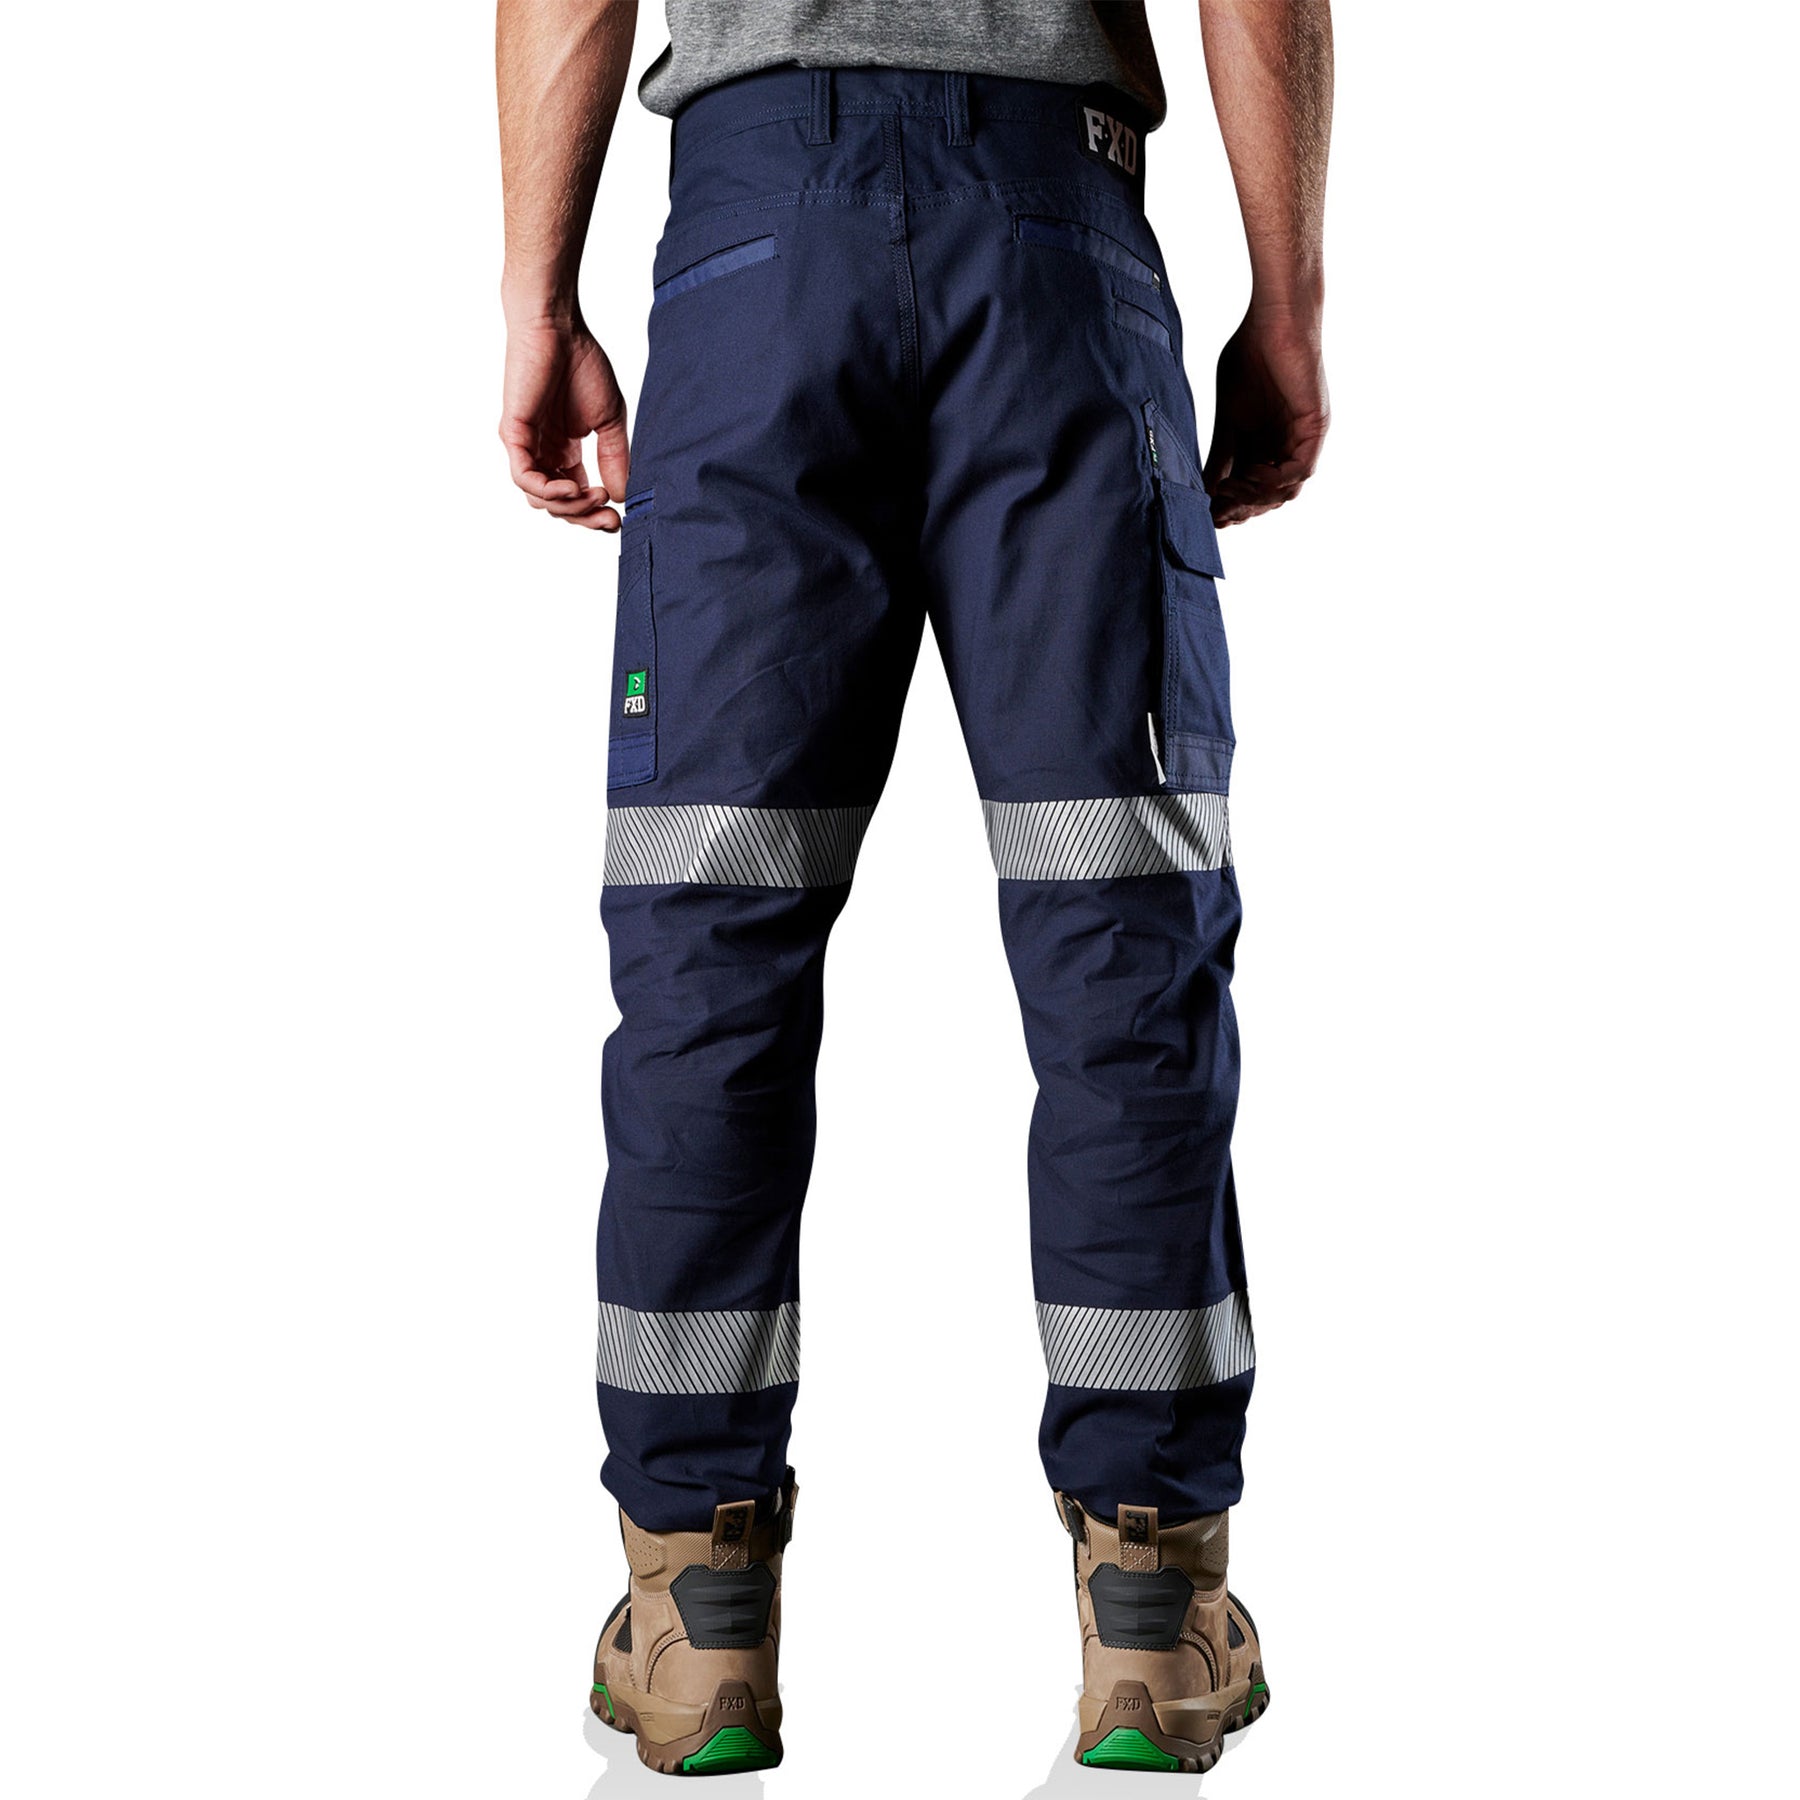 fxd reflective stretch work pants in navy